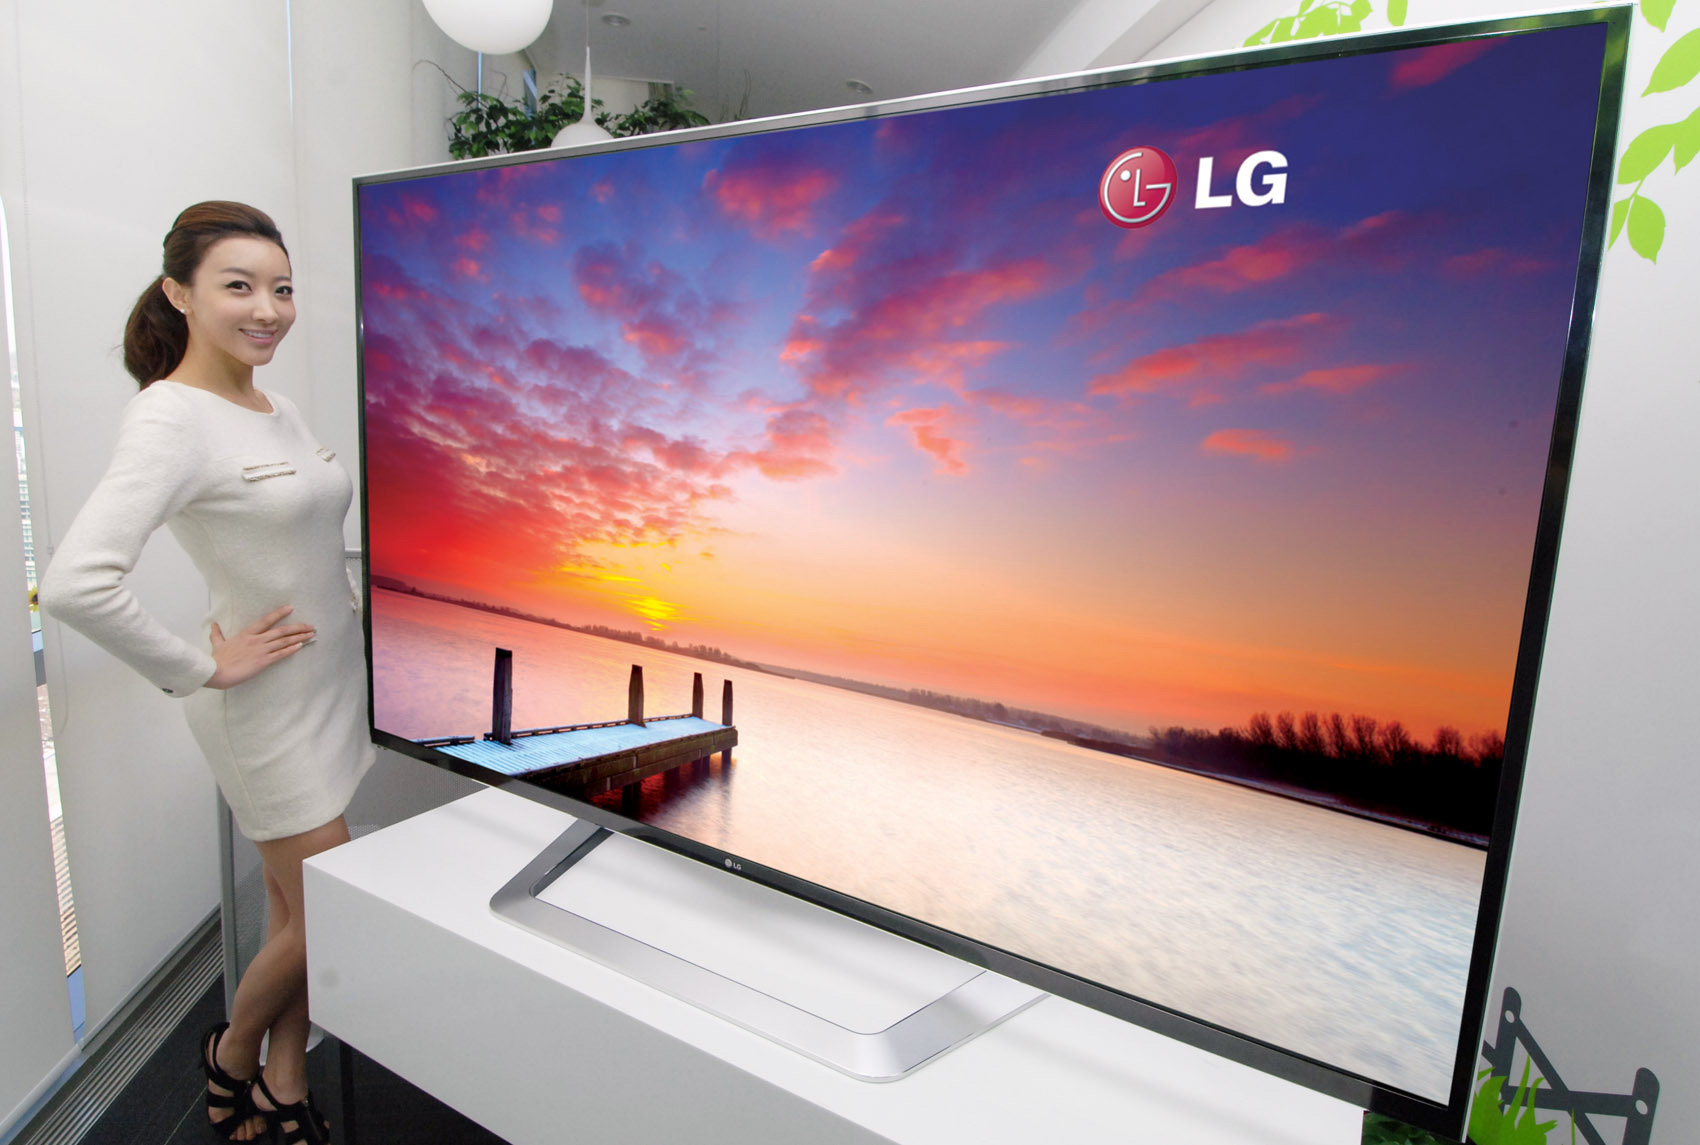 Google Assistant to be included in LG’s 2018 TV lineup